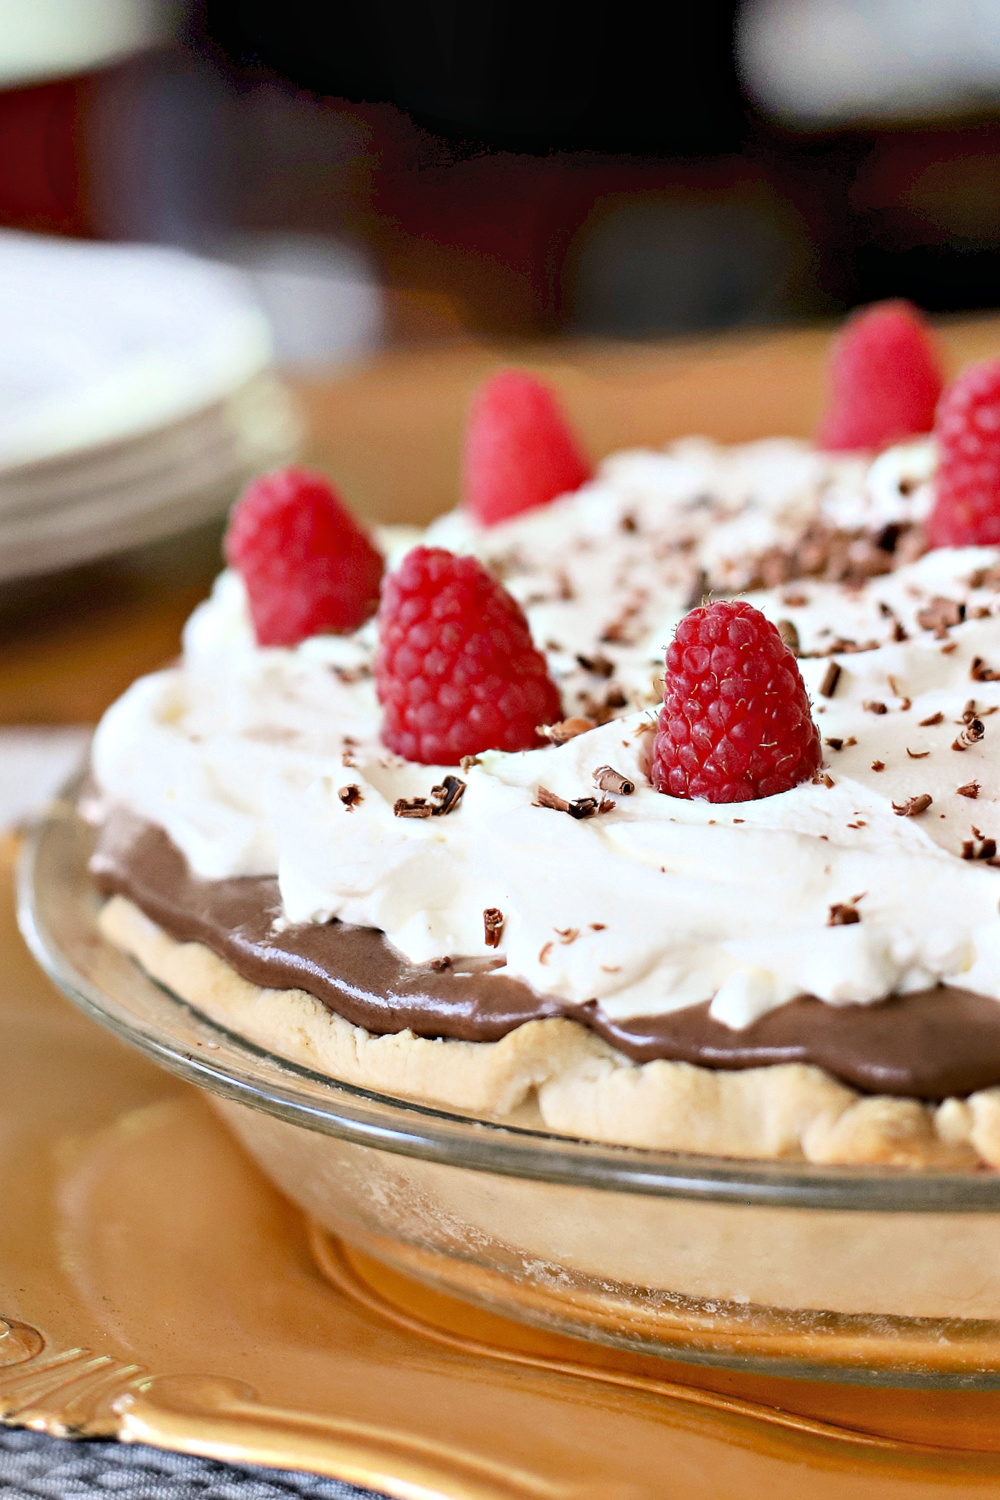 Easy recipe for a creamy, decadent chocolate cream pie with cream cheese and dark chocolate chips using a homemade or refrigerator pie crust. 